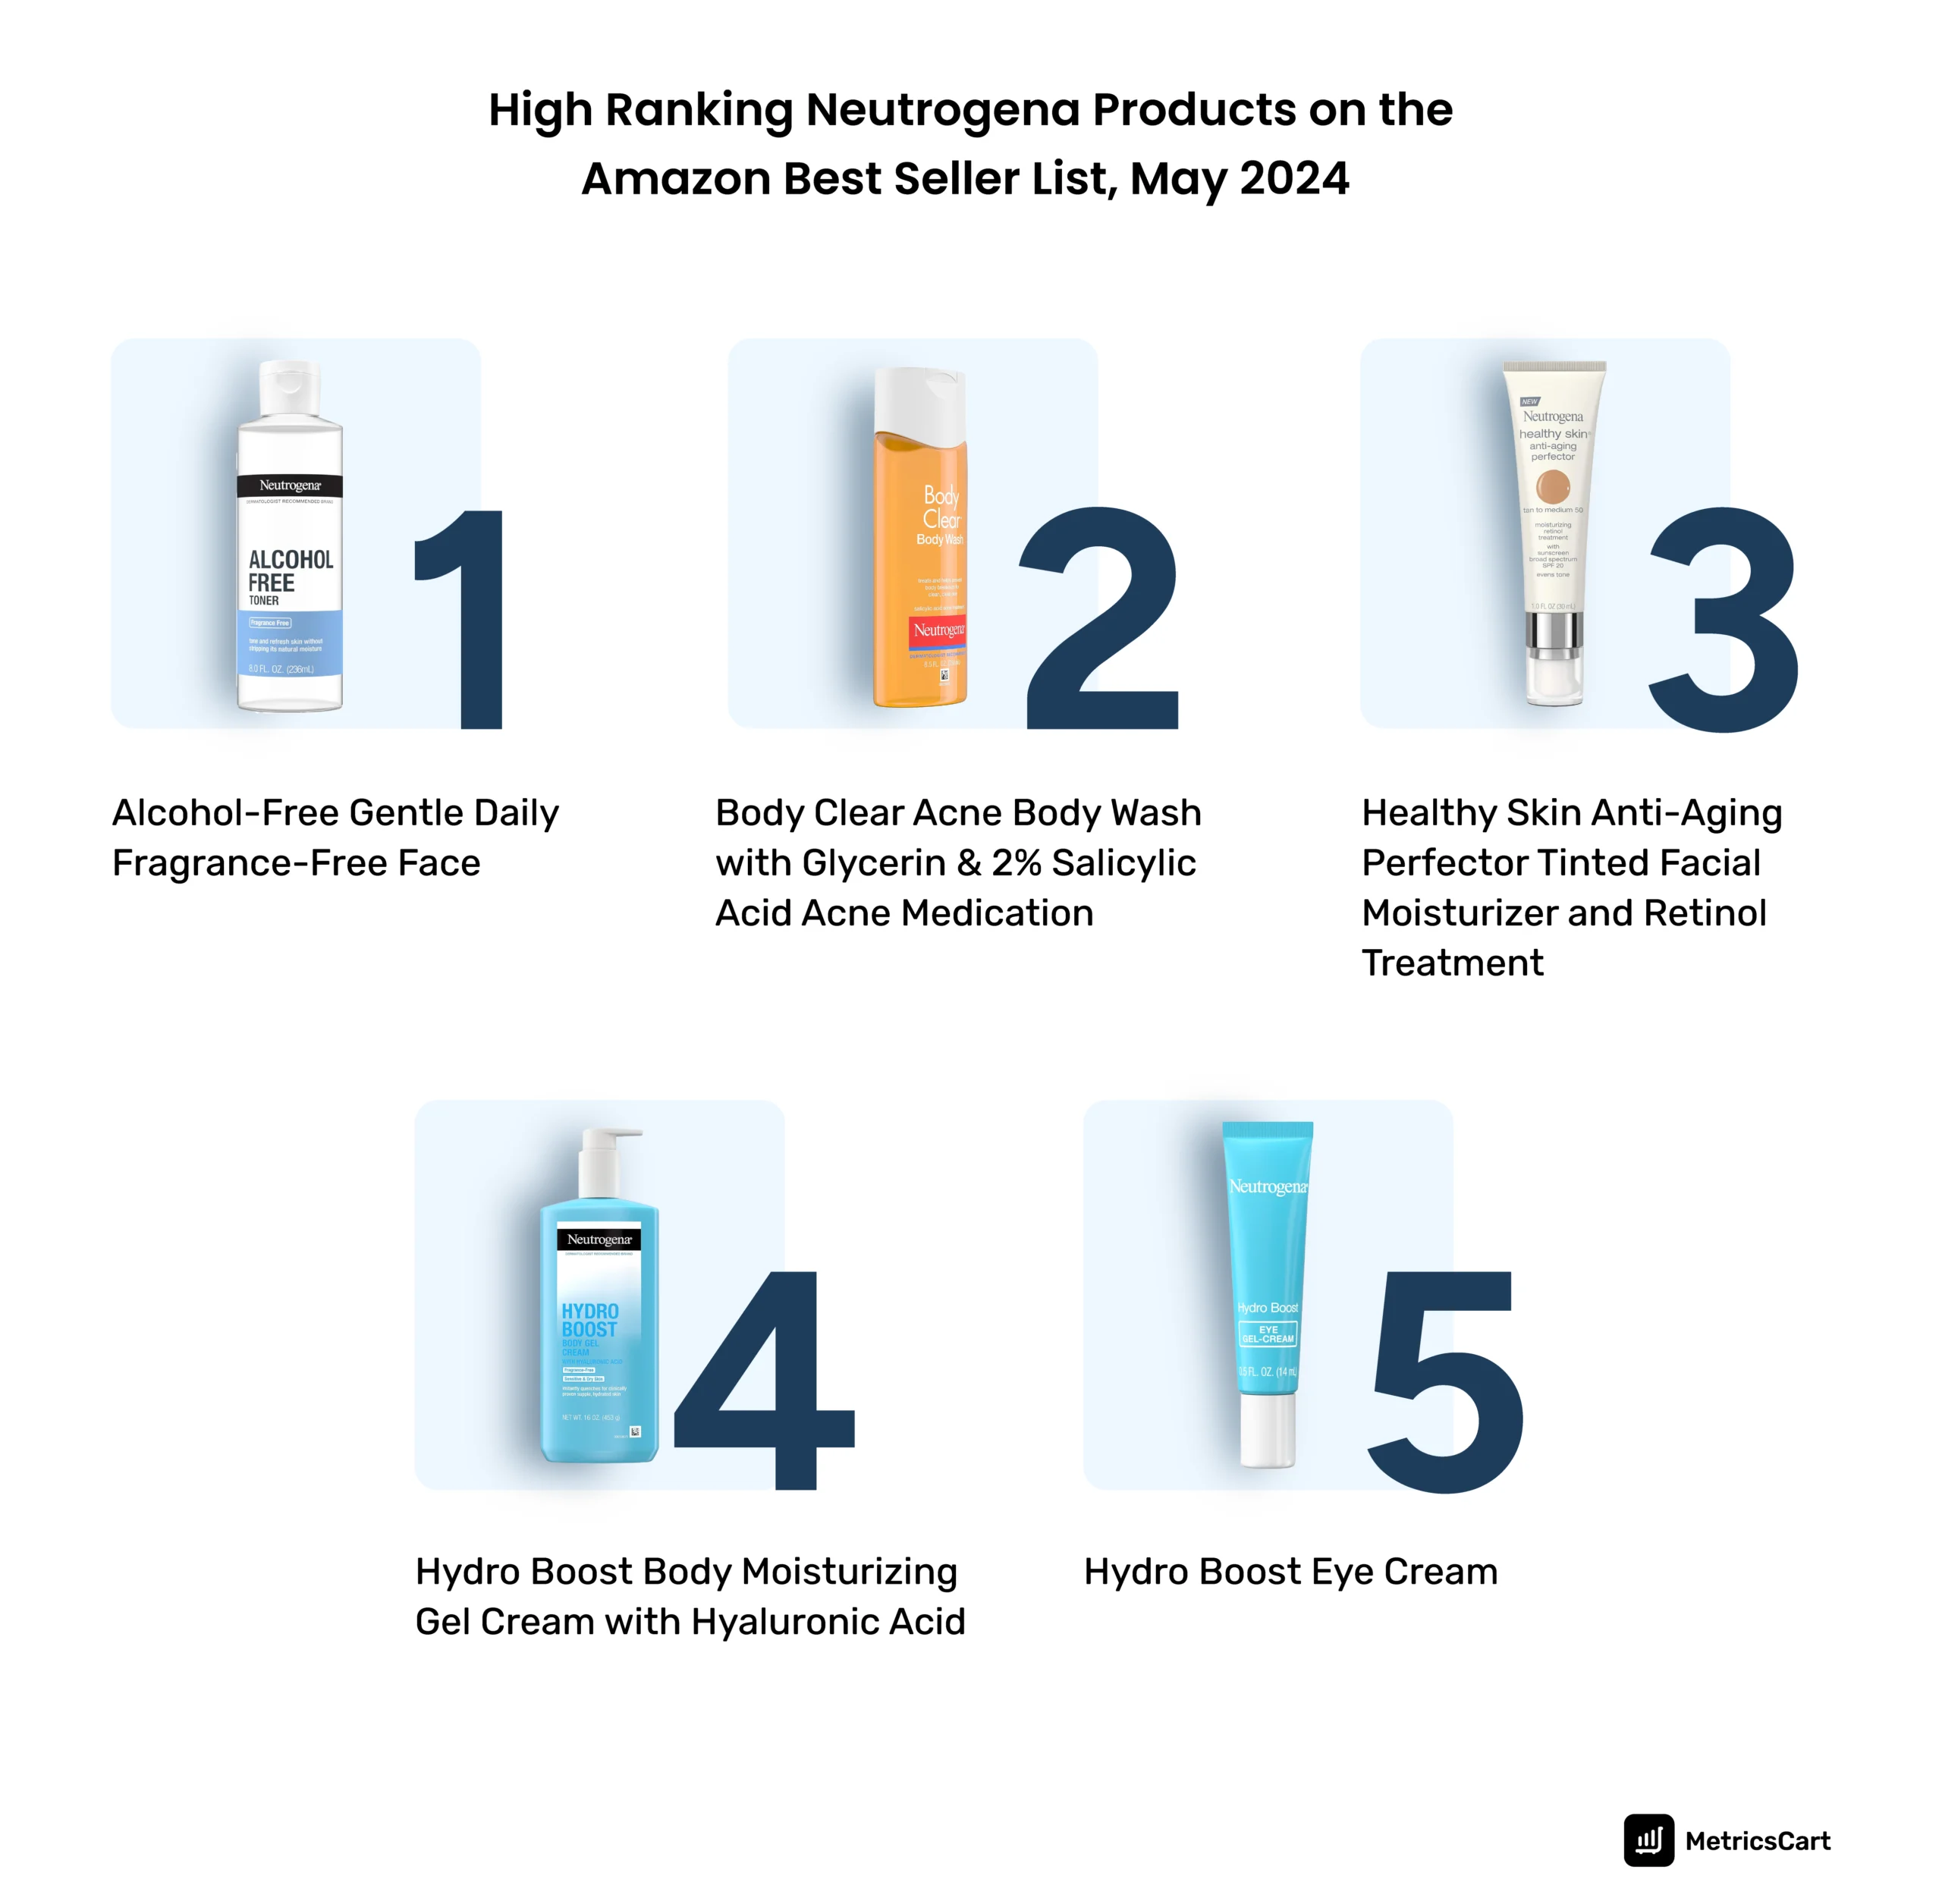 high-ranking Neutrogena products on the Amazon Best Seller list for May 2024